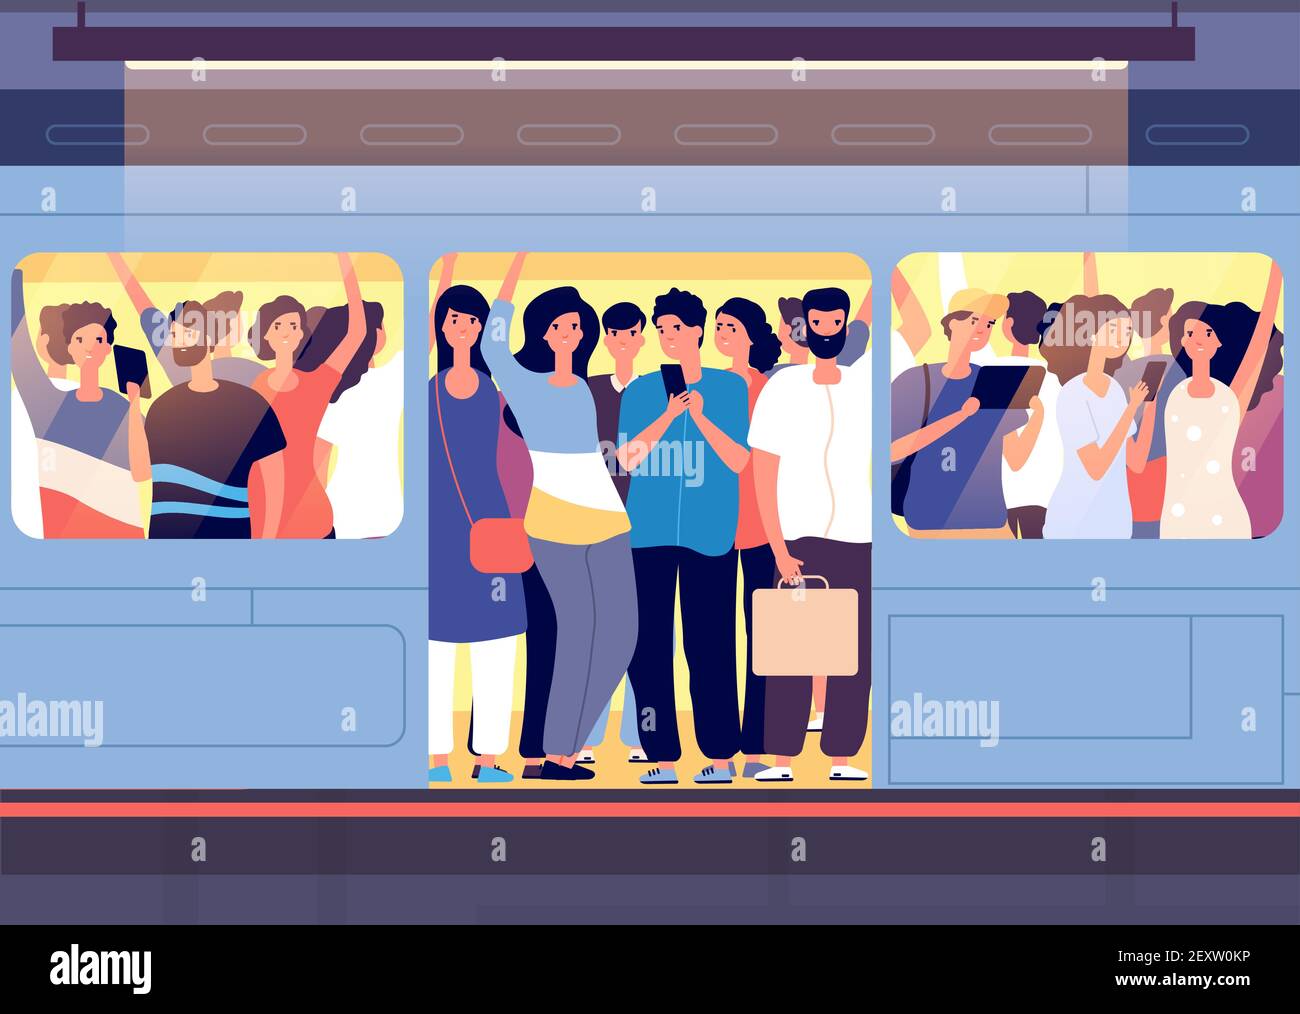 Crowd in subway train. People pushing each other in metro car at station at rush hour. City traveling transport problem vector concept. Crowd public train, transport van with people illustration Stock Vector